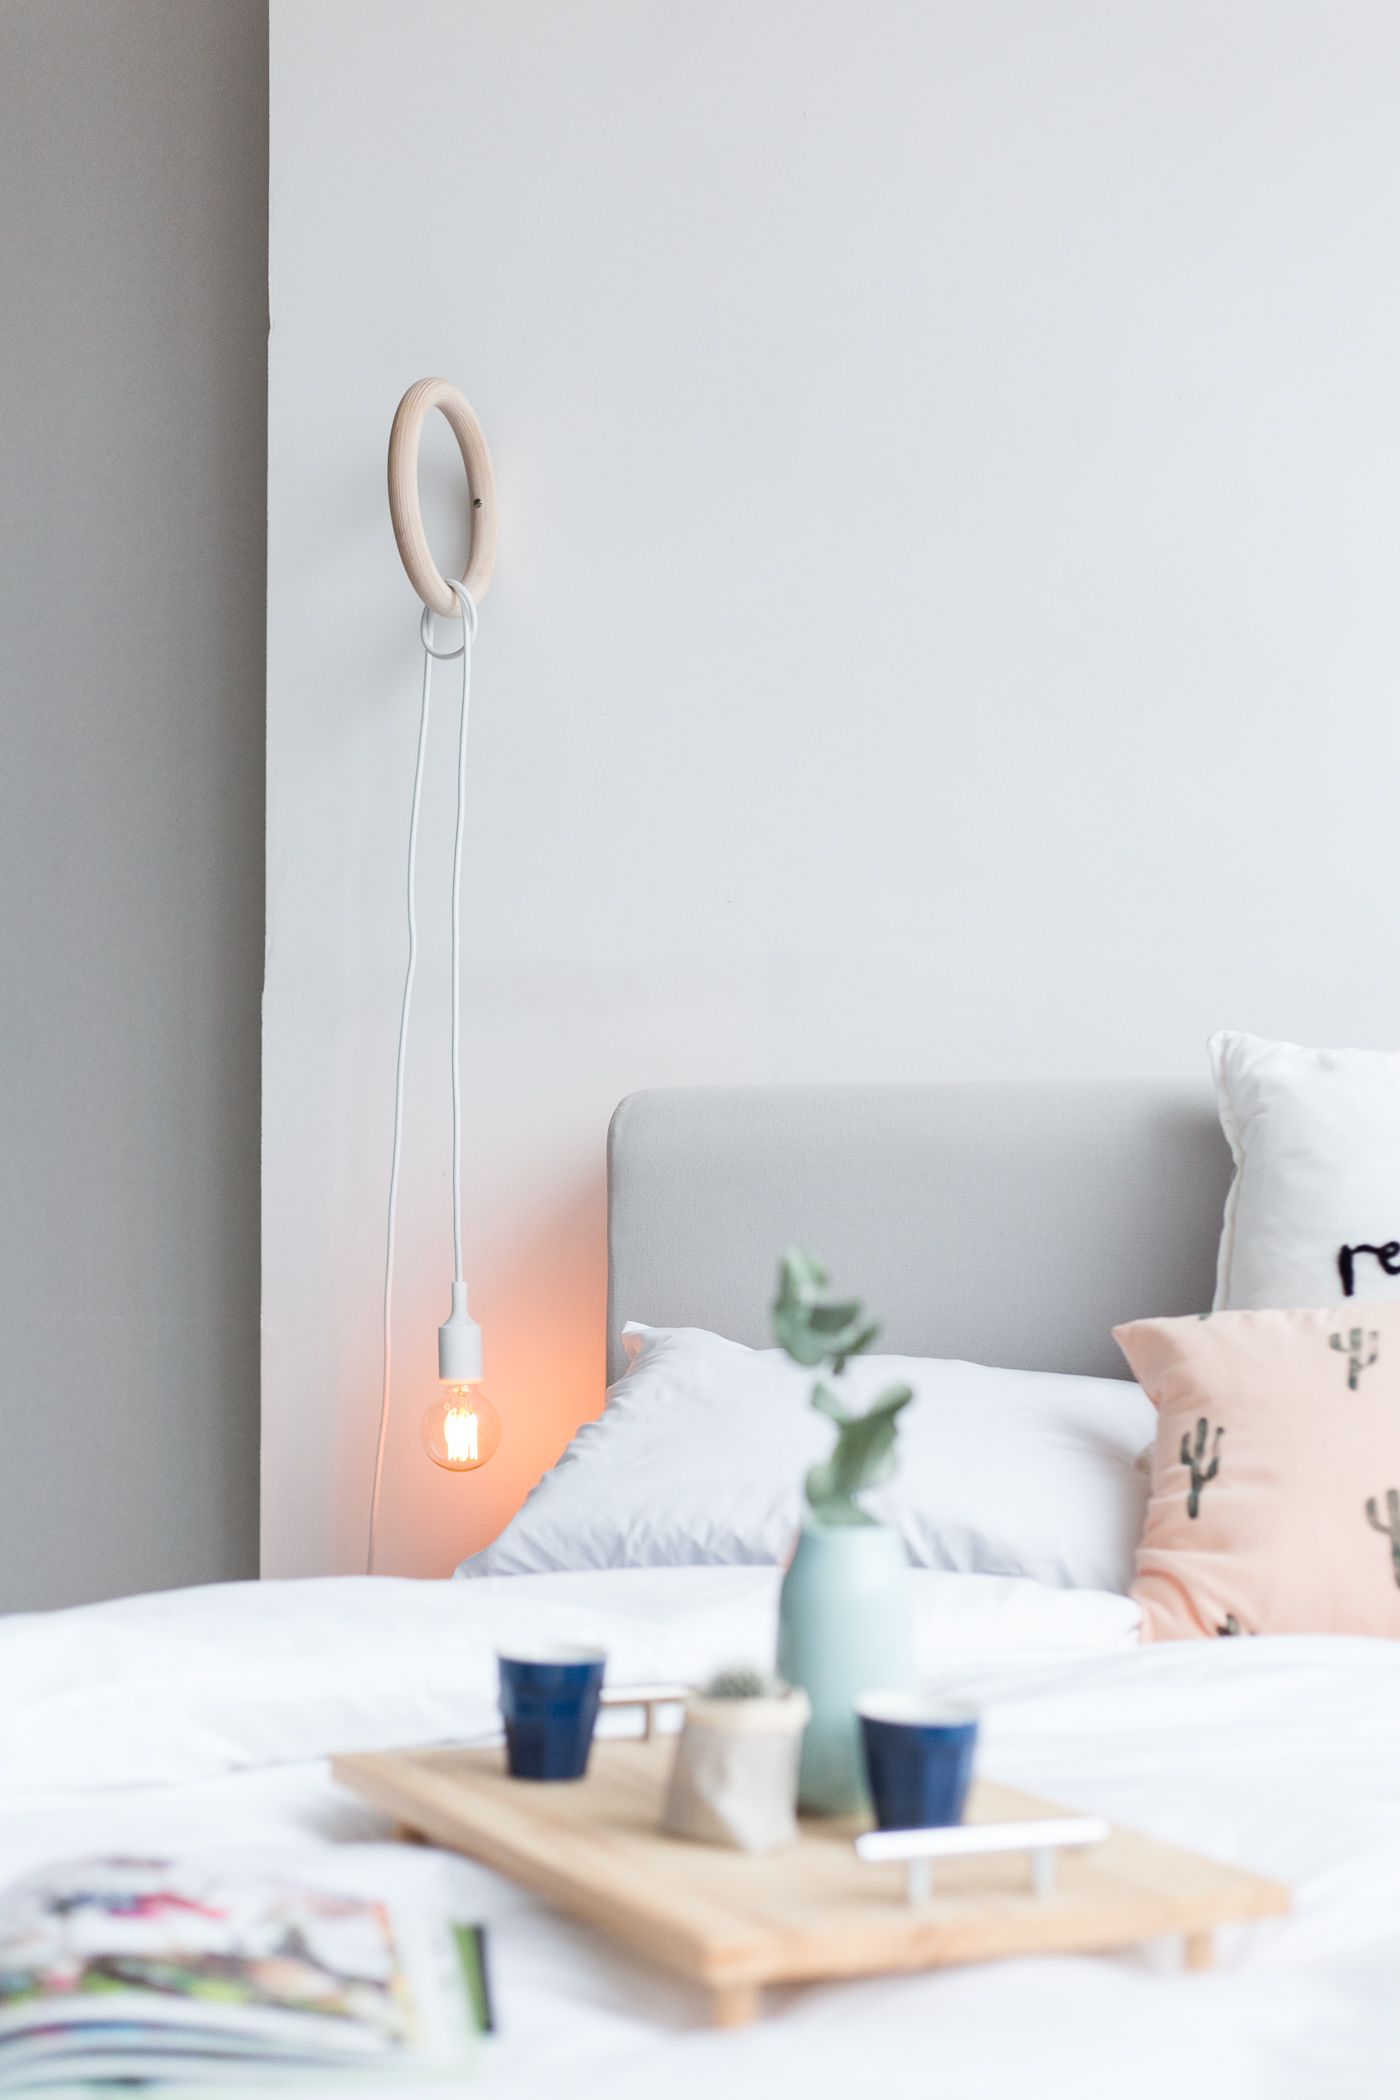 Brighten up your Bedroom Decor with this DIY Gym Ring Hanging Lamp